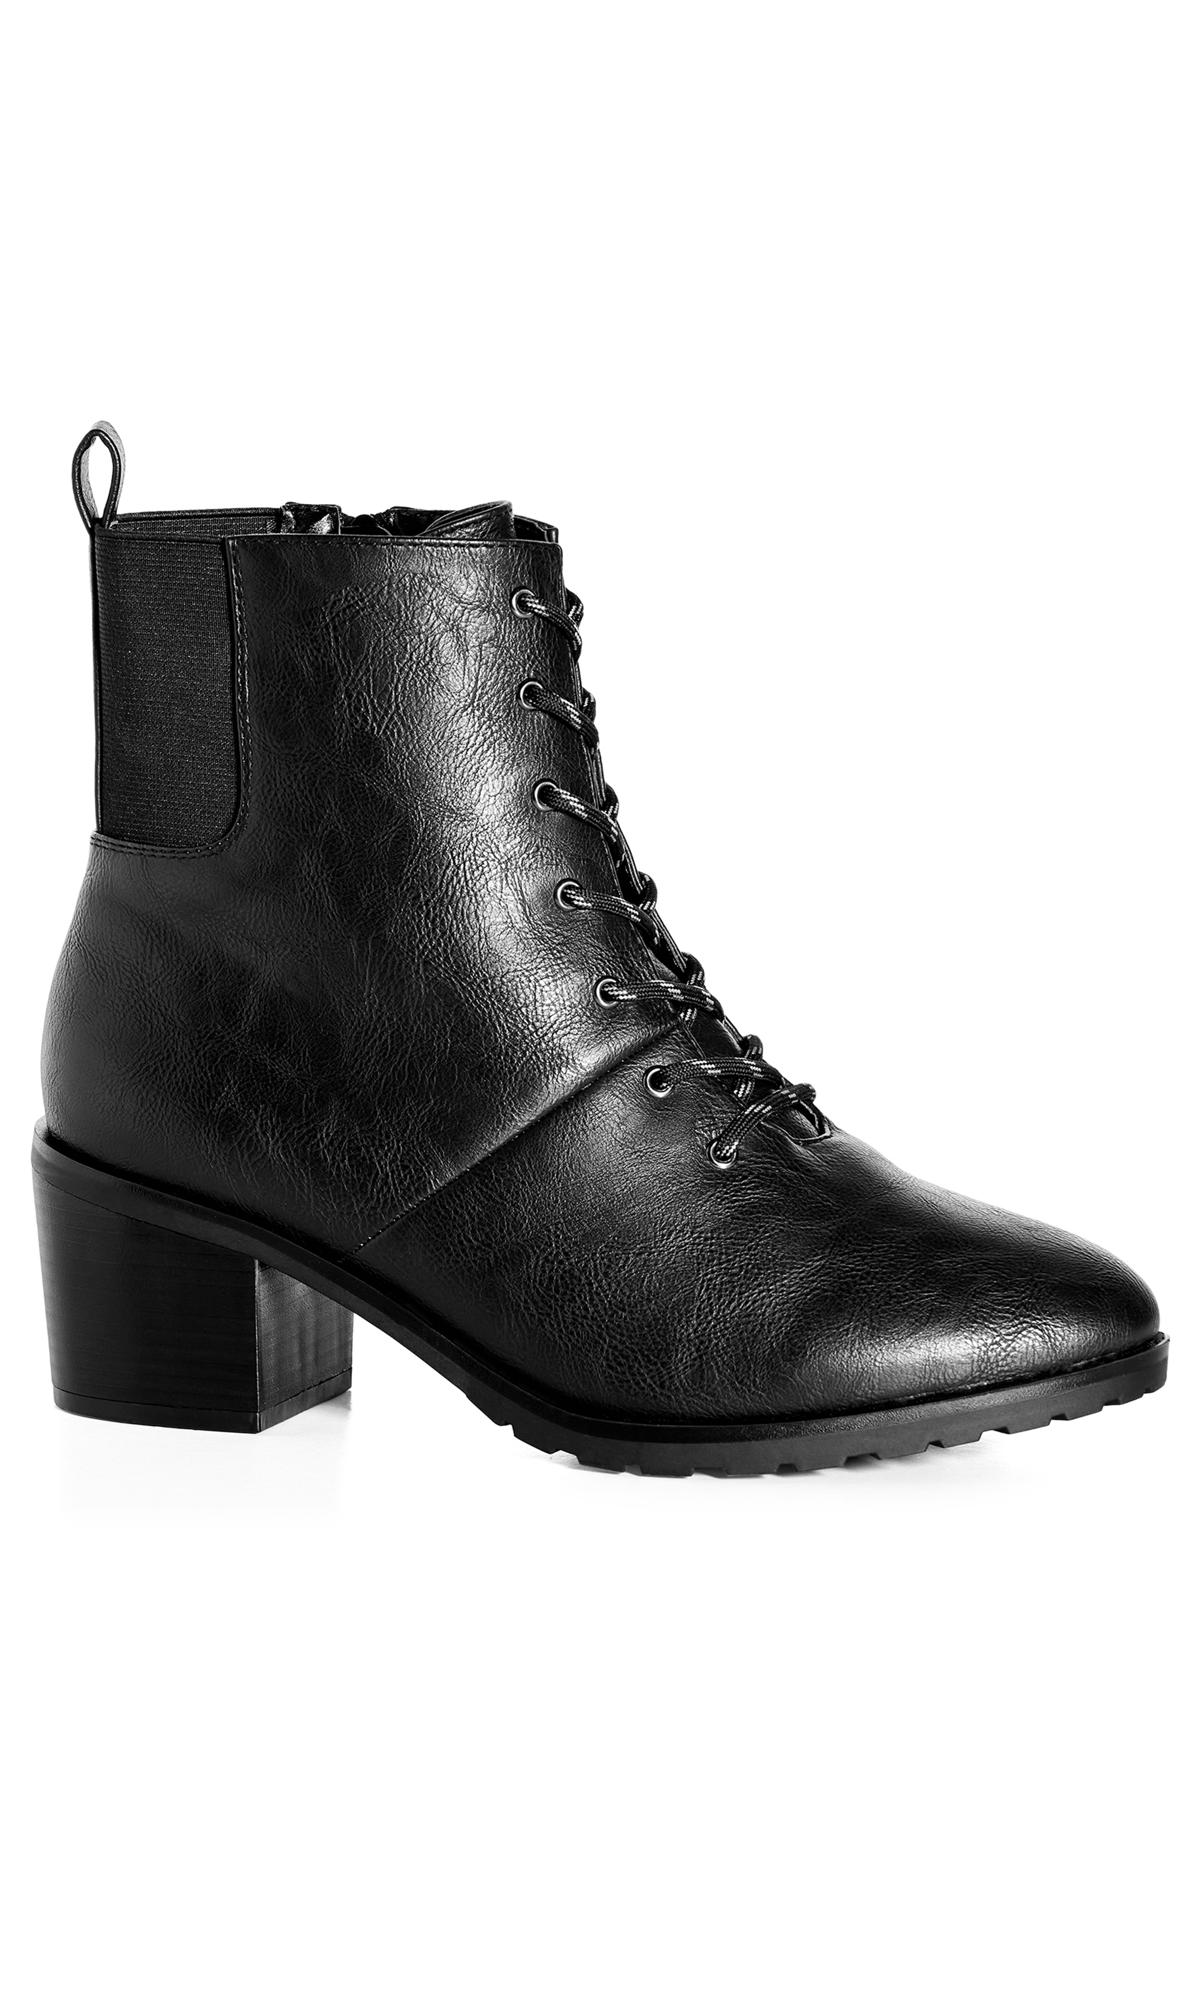 Sloane Lace Up Black Ankle Boot 2